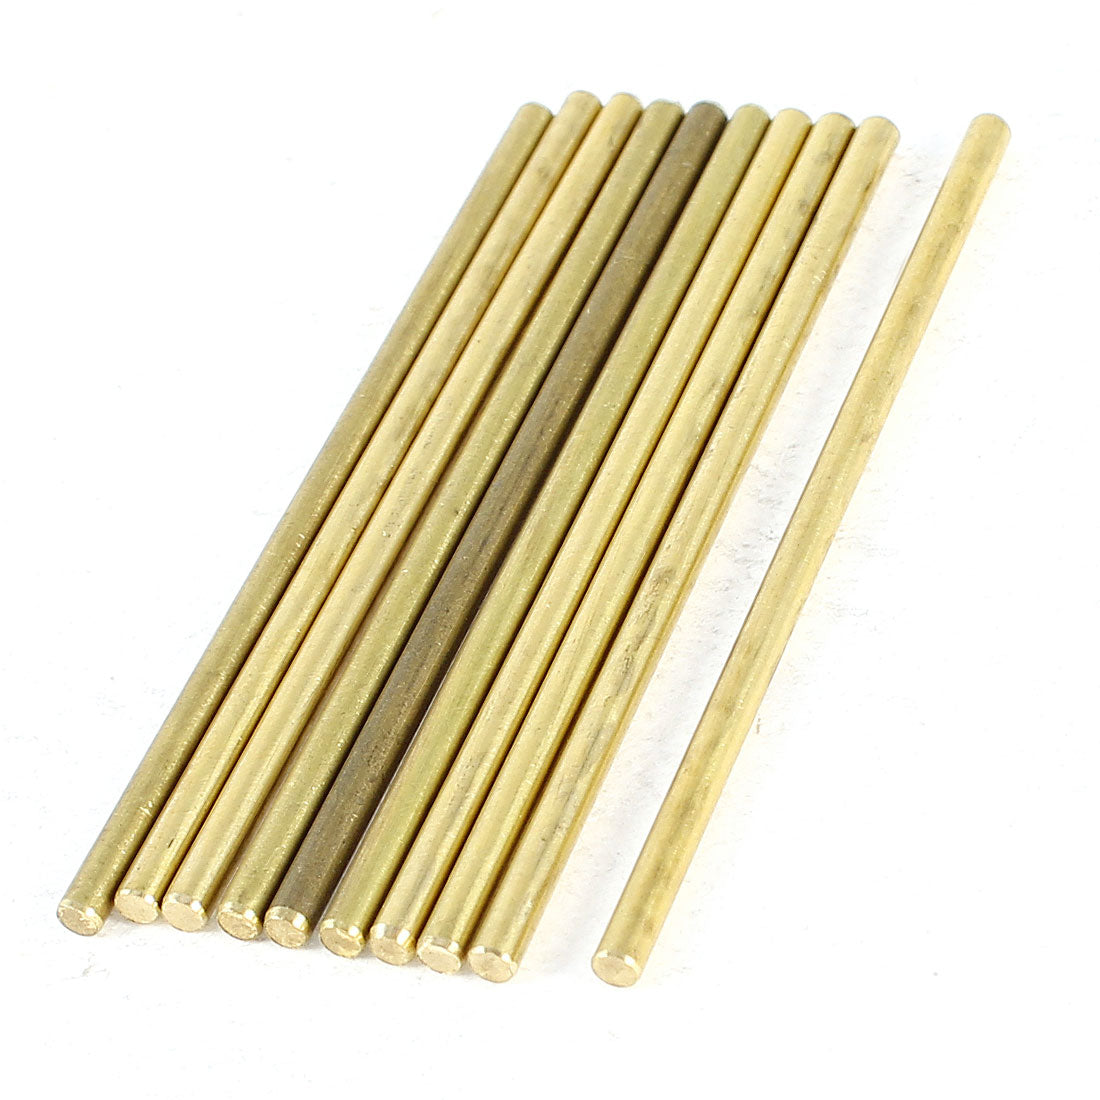 uxcell Uxcell 10 Pcs Car Helicopter Model DIY Brass Axles Rod Bars 2mm x 50mm